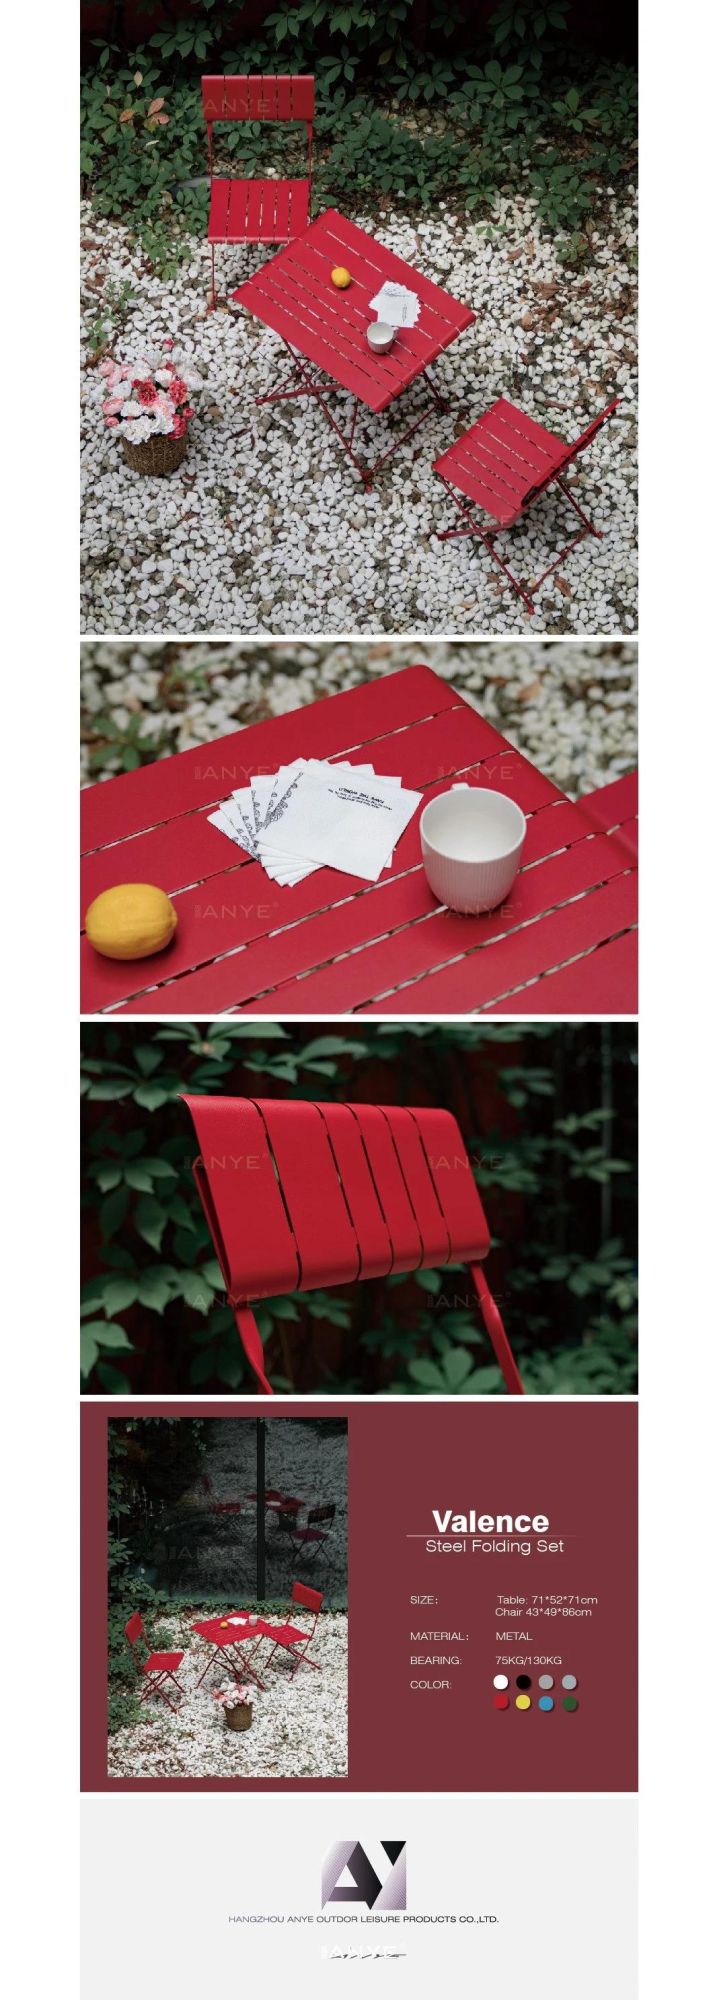 Wedding Furniture Portable Folding Square Table Outdoor Chair Casual Dining Furniture